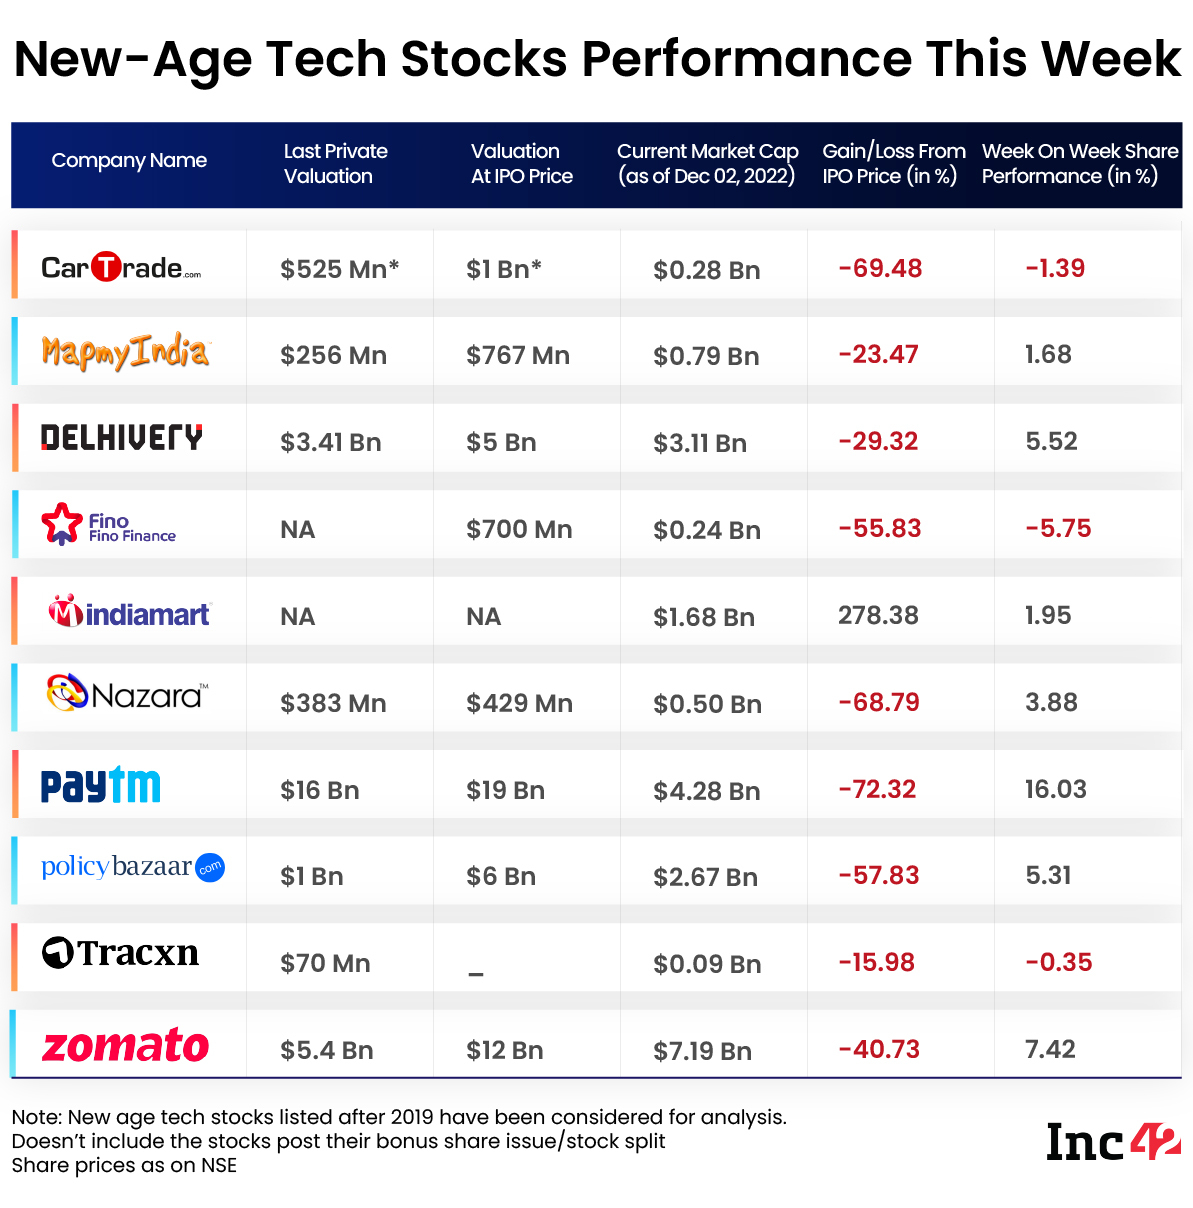 New-Age Tech Stocks performance table